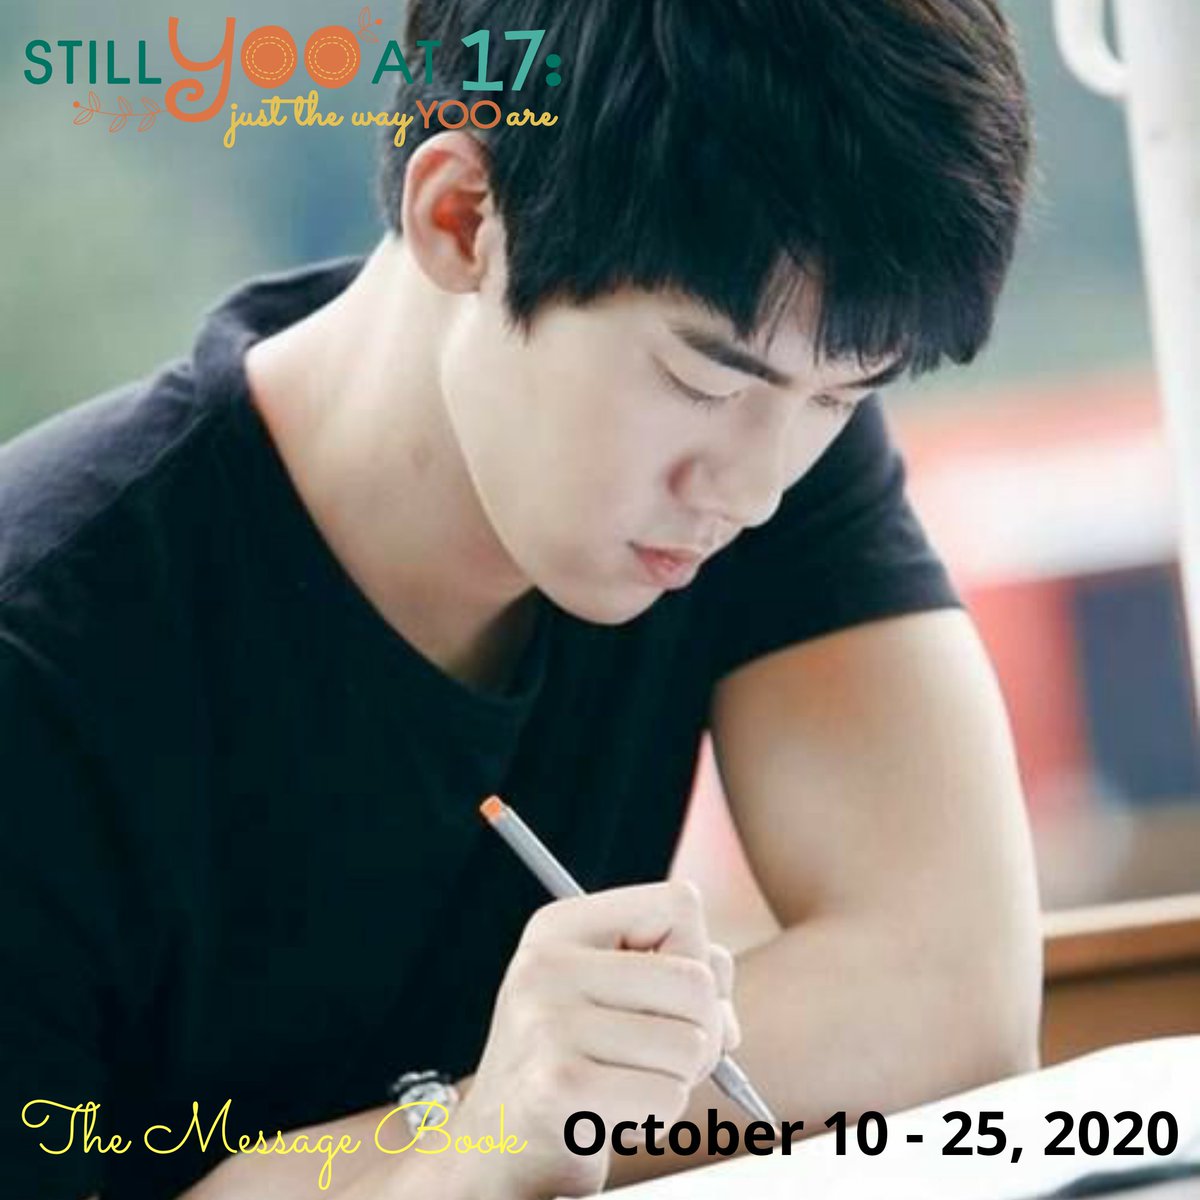   #StillYOOAt17  #YooYeonSeokA reminder to get your pens and your hearts moving!  The message book for our 17th year anniversary project is open up to October 25, 2020 only.  Thank you! (Mechanics in previous post)